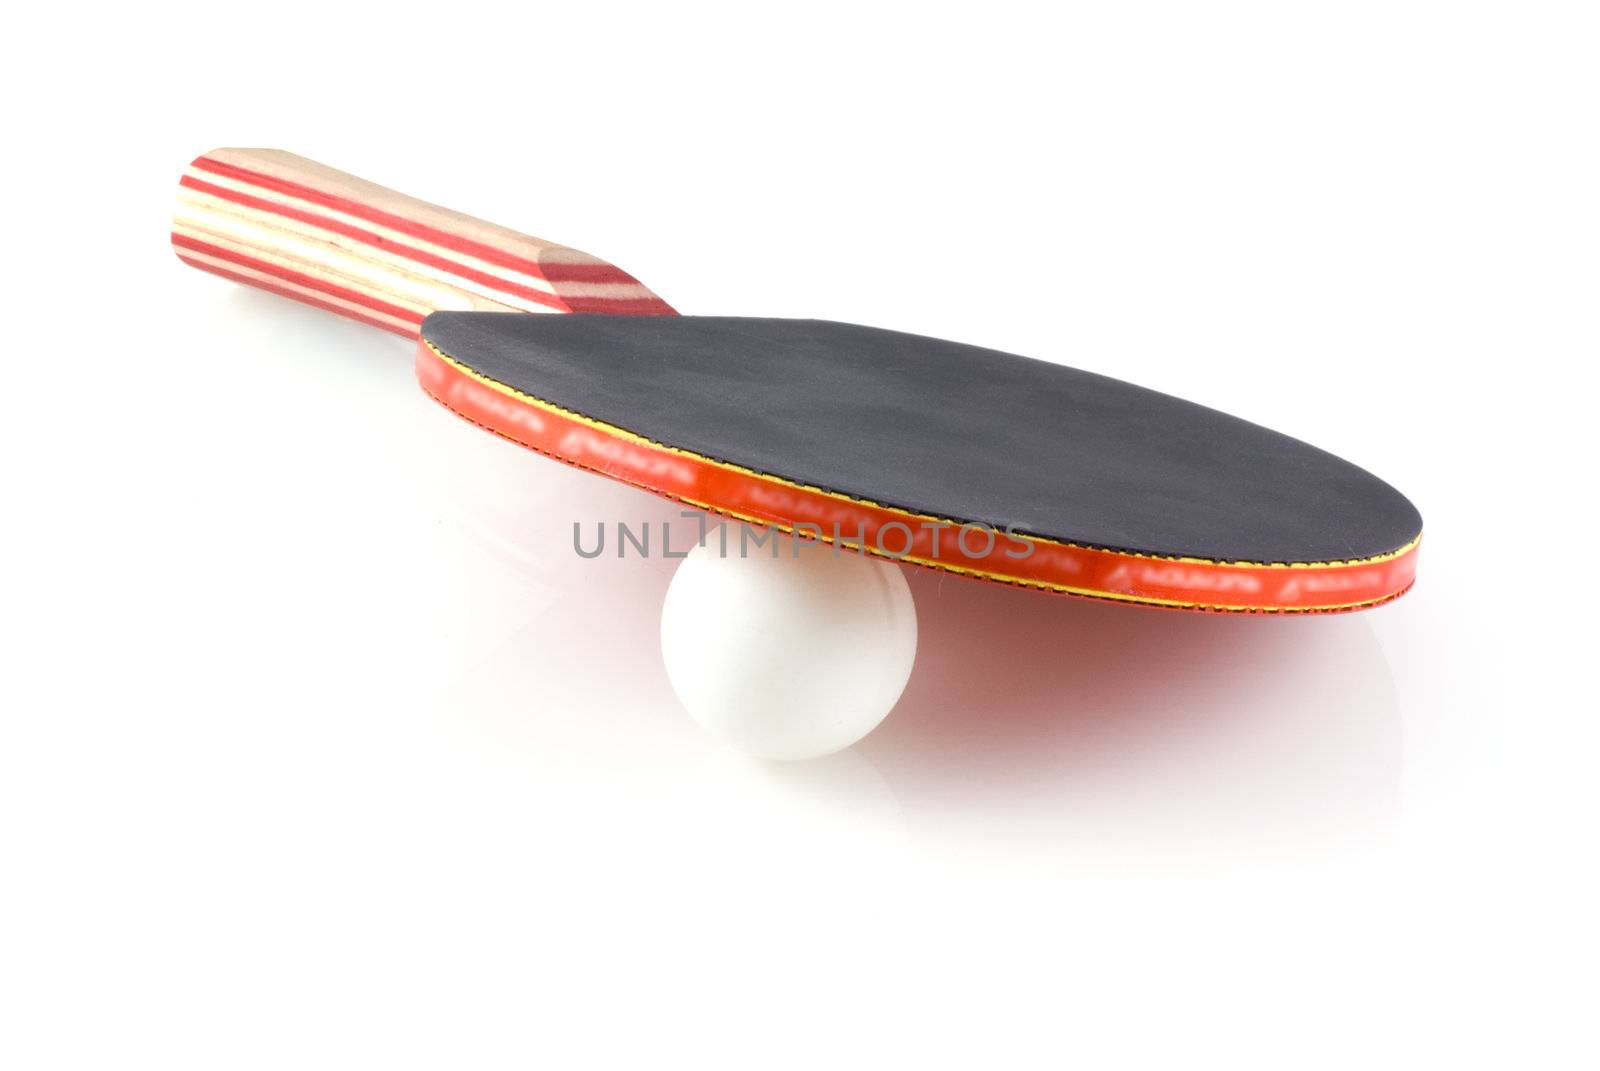 Table tennis bat with ball on a white background.